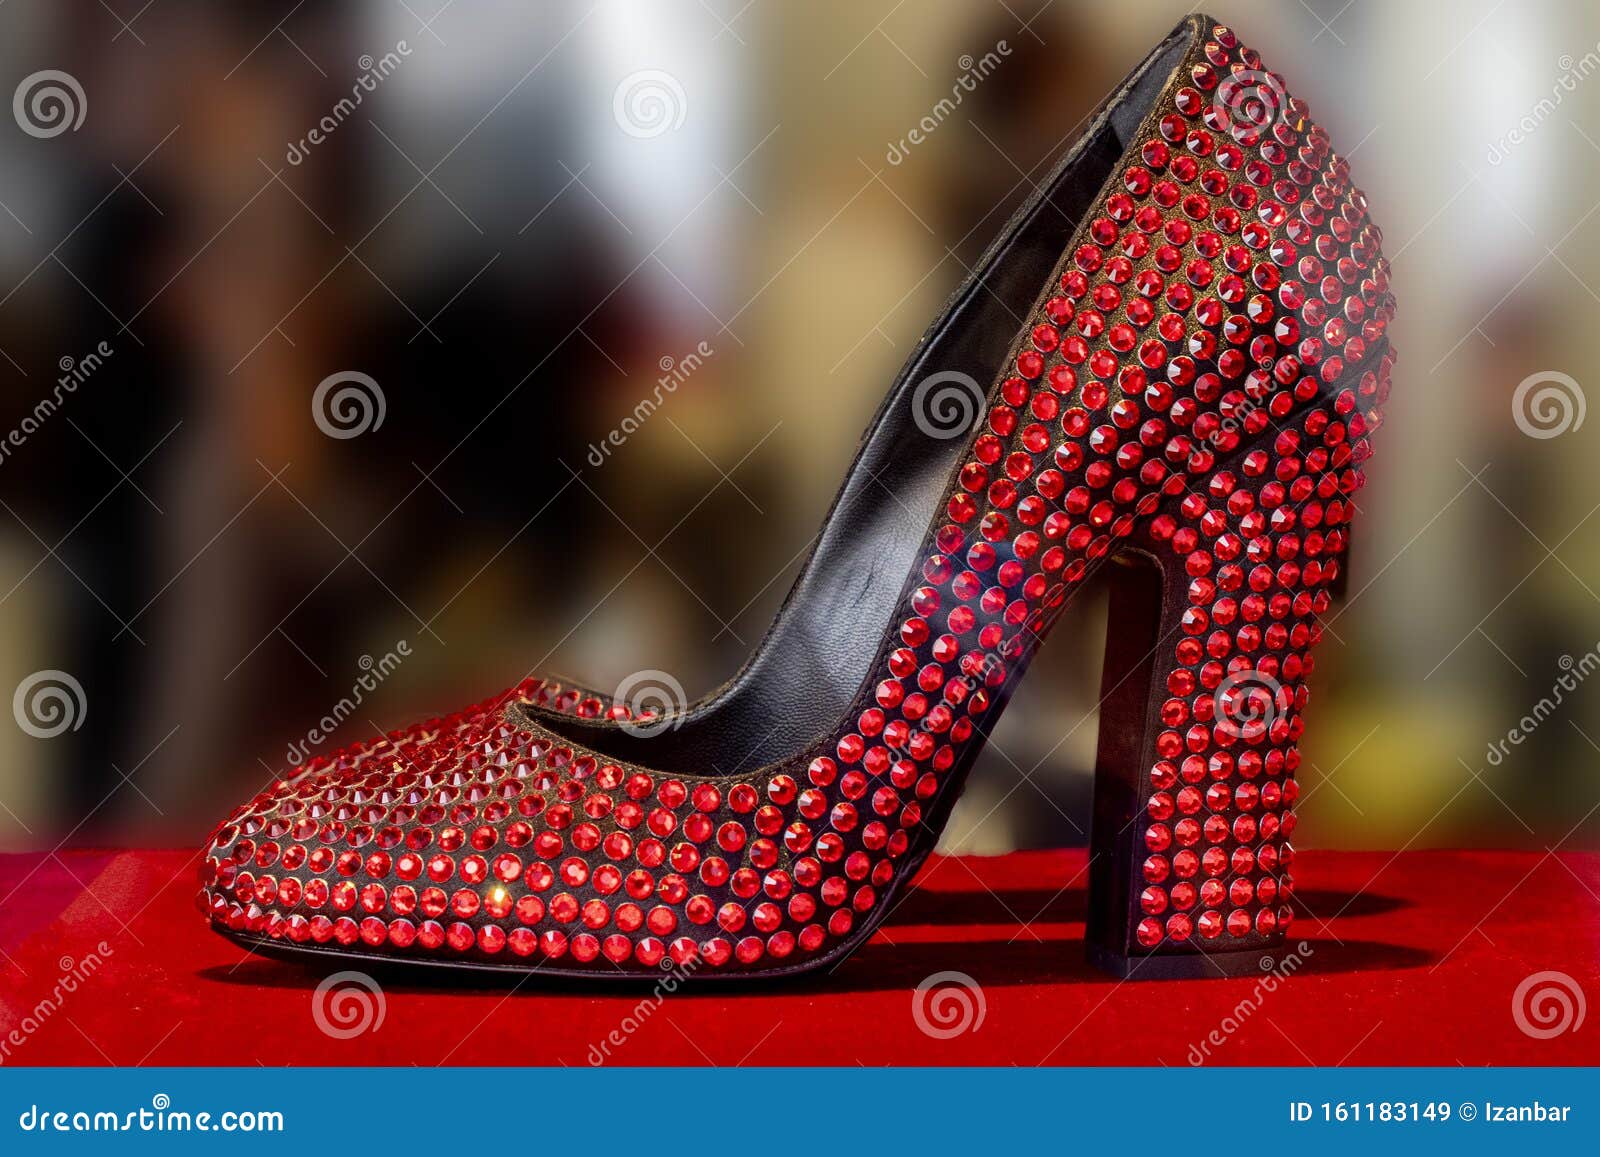 Ruby Covered High Heels Red Woman Shoe Stock Image - Image of shoes